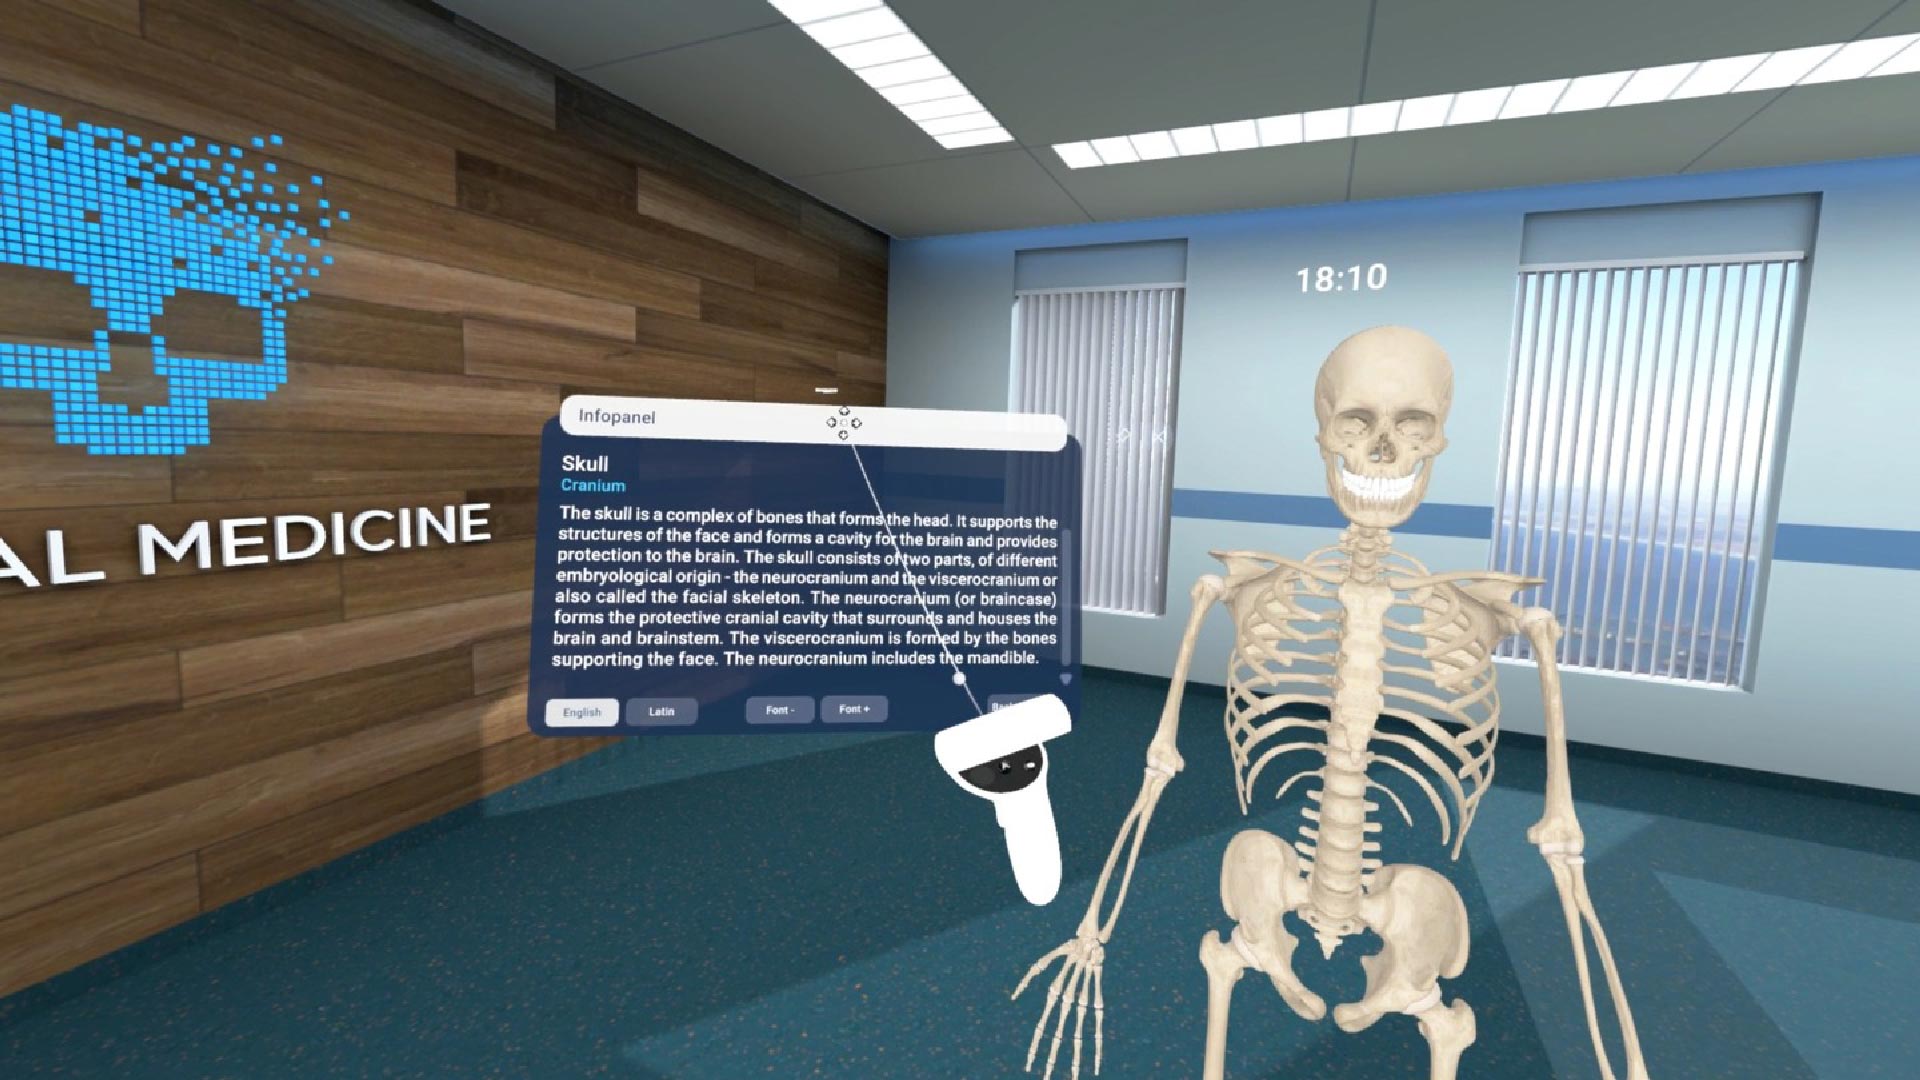 VR Education App ‘Human Anatomy’ Now Available on PSVR 2 – Road to VR